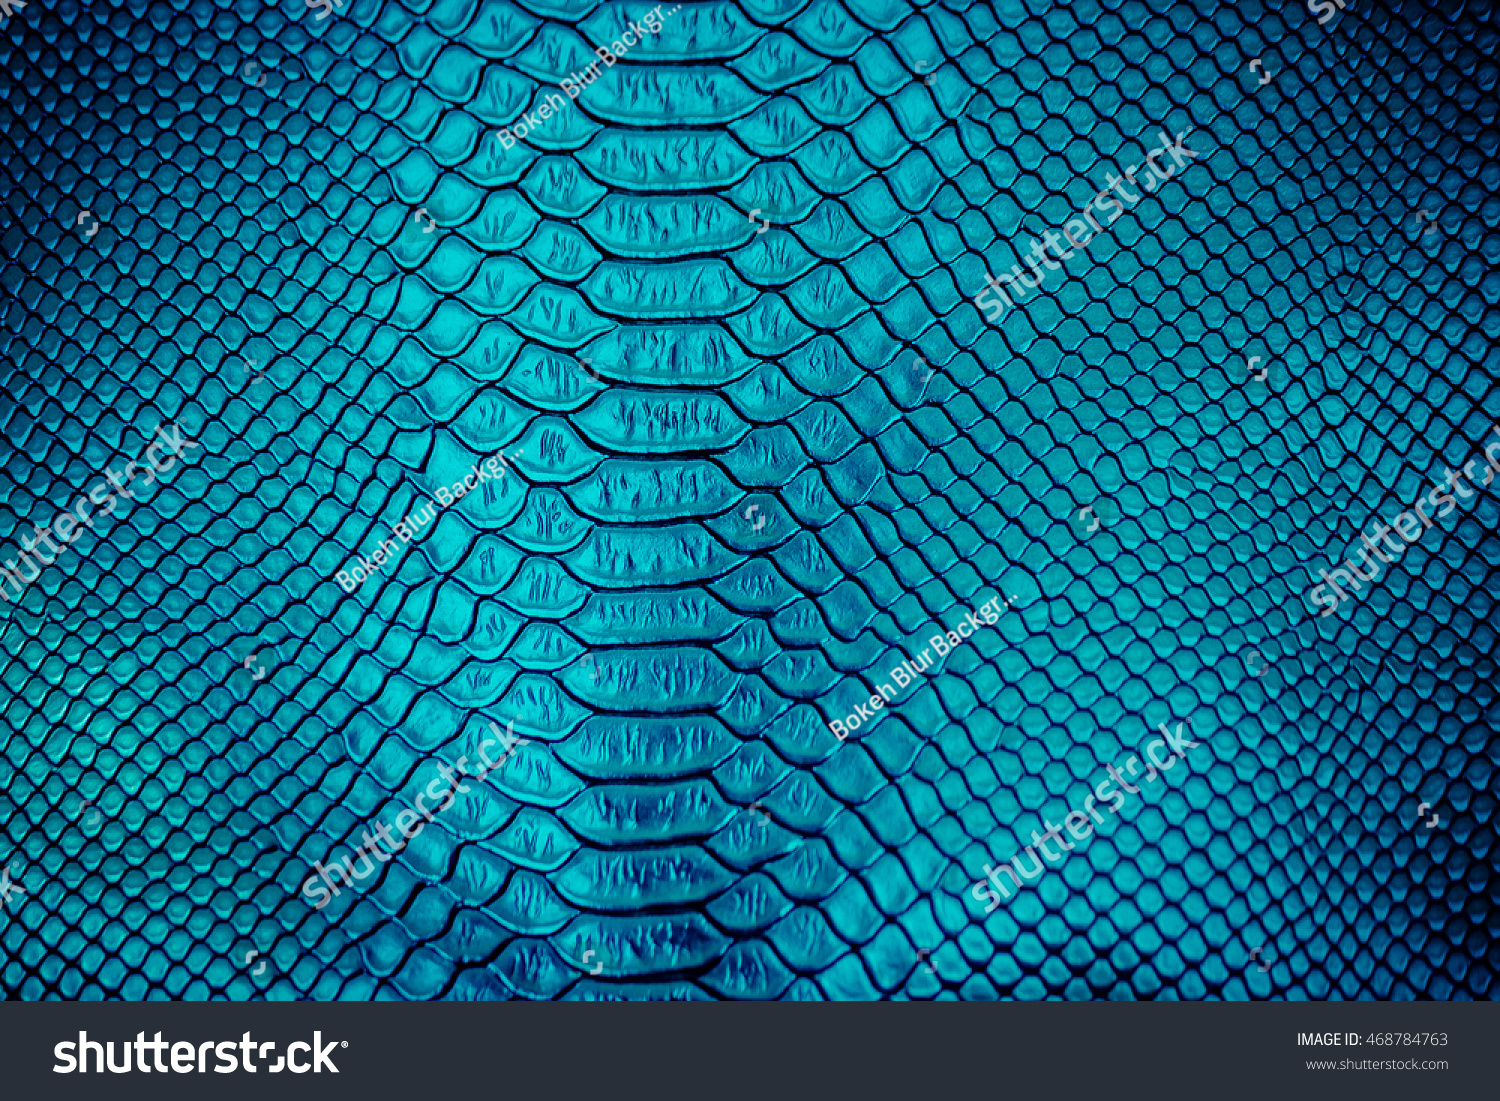 Scaly texture Images, Stock Photos & Vectors | Shutterstock